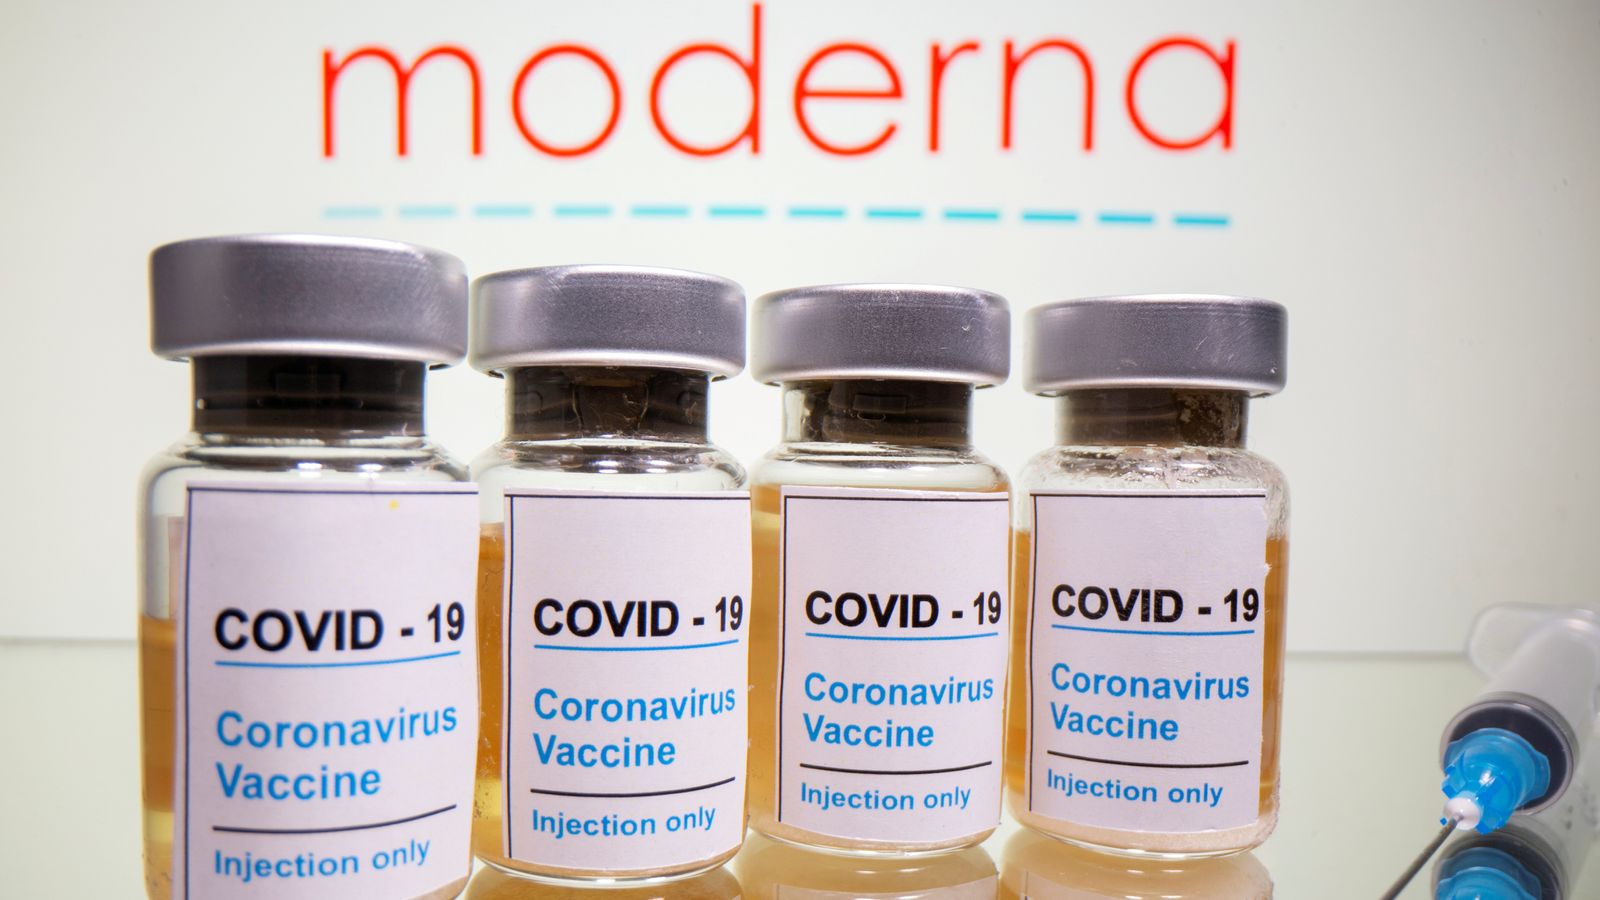 COVID-19 vaccine: UK orders five million doses of new Moderna jab by spring next year